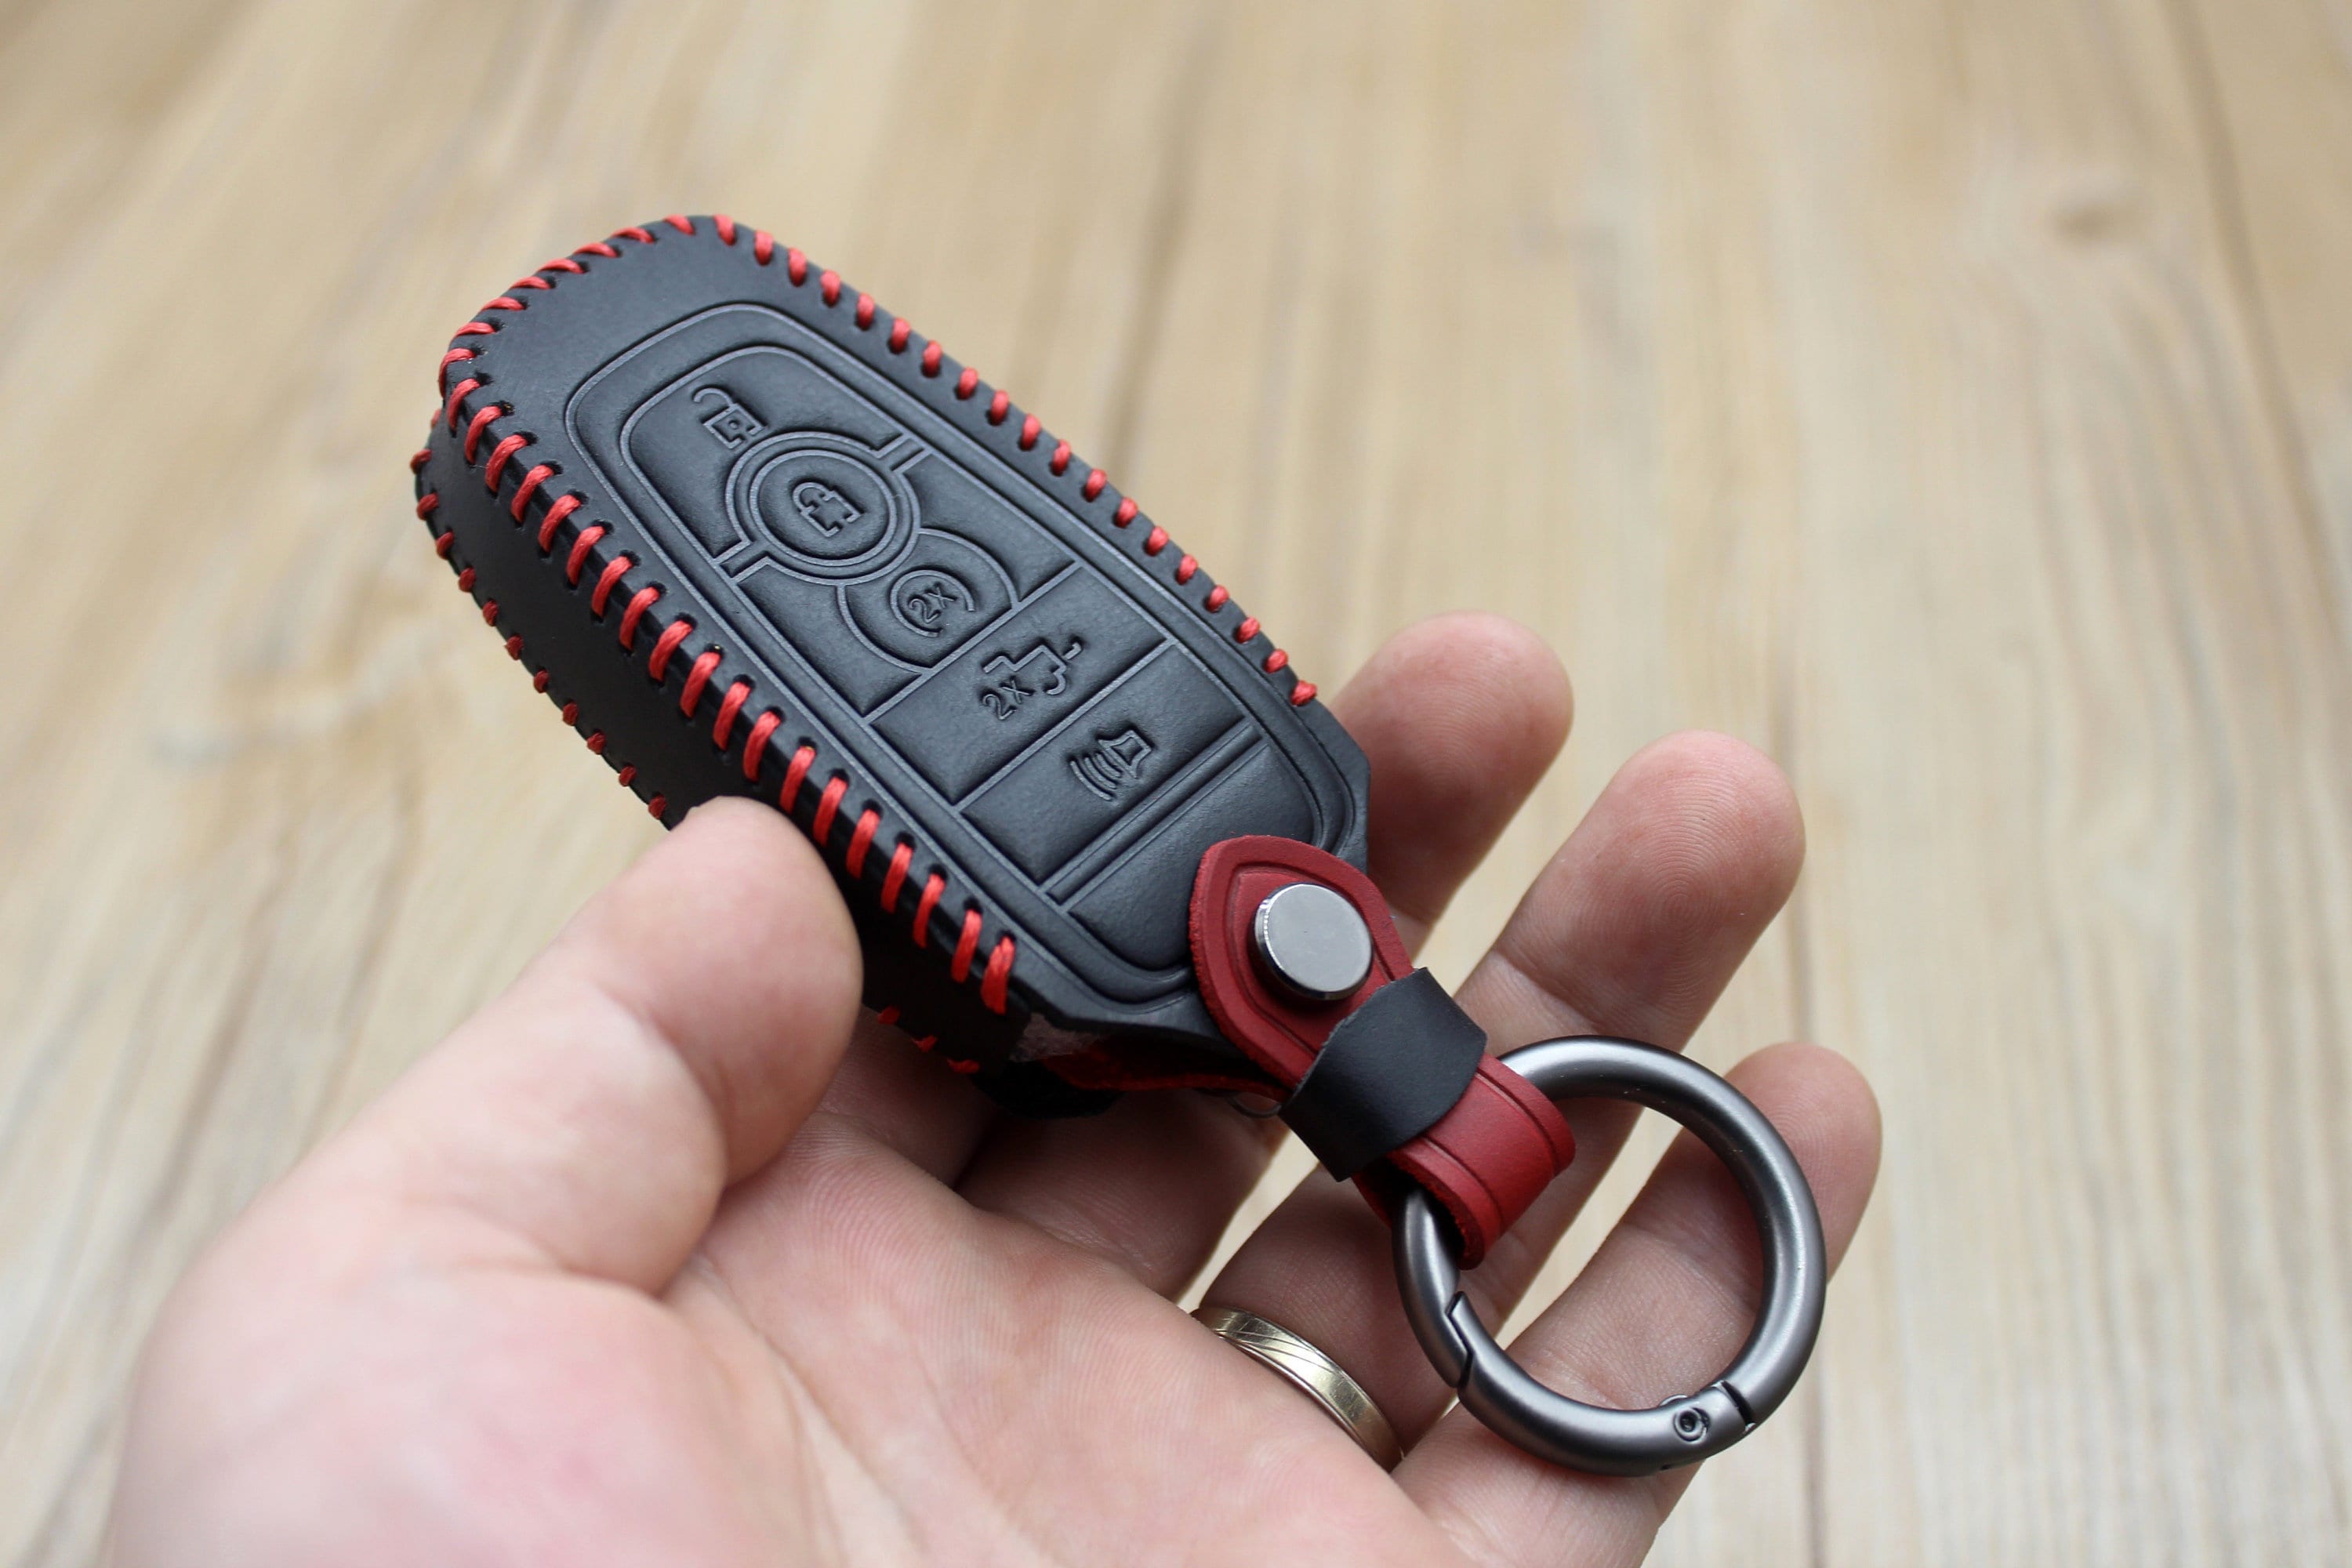 Leather key fob cover case fit for Ford F9 remote key, 11,95 €